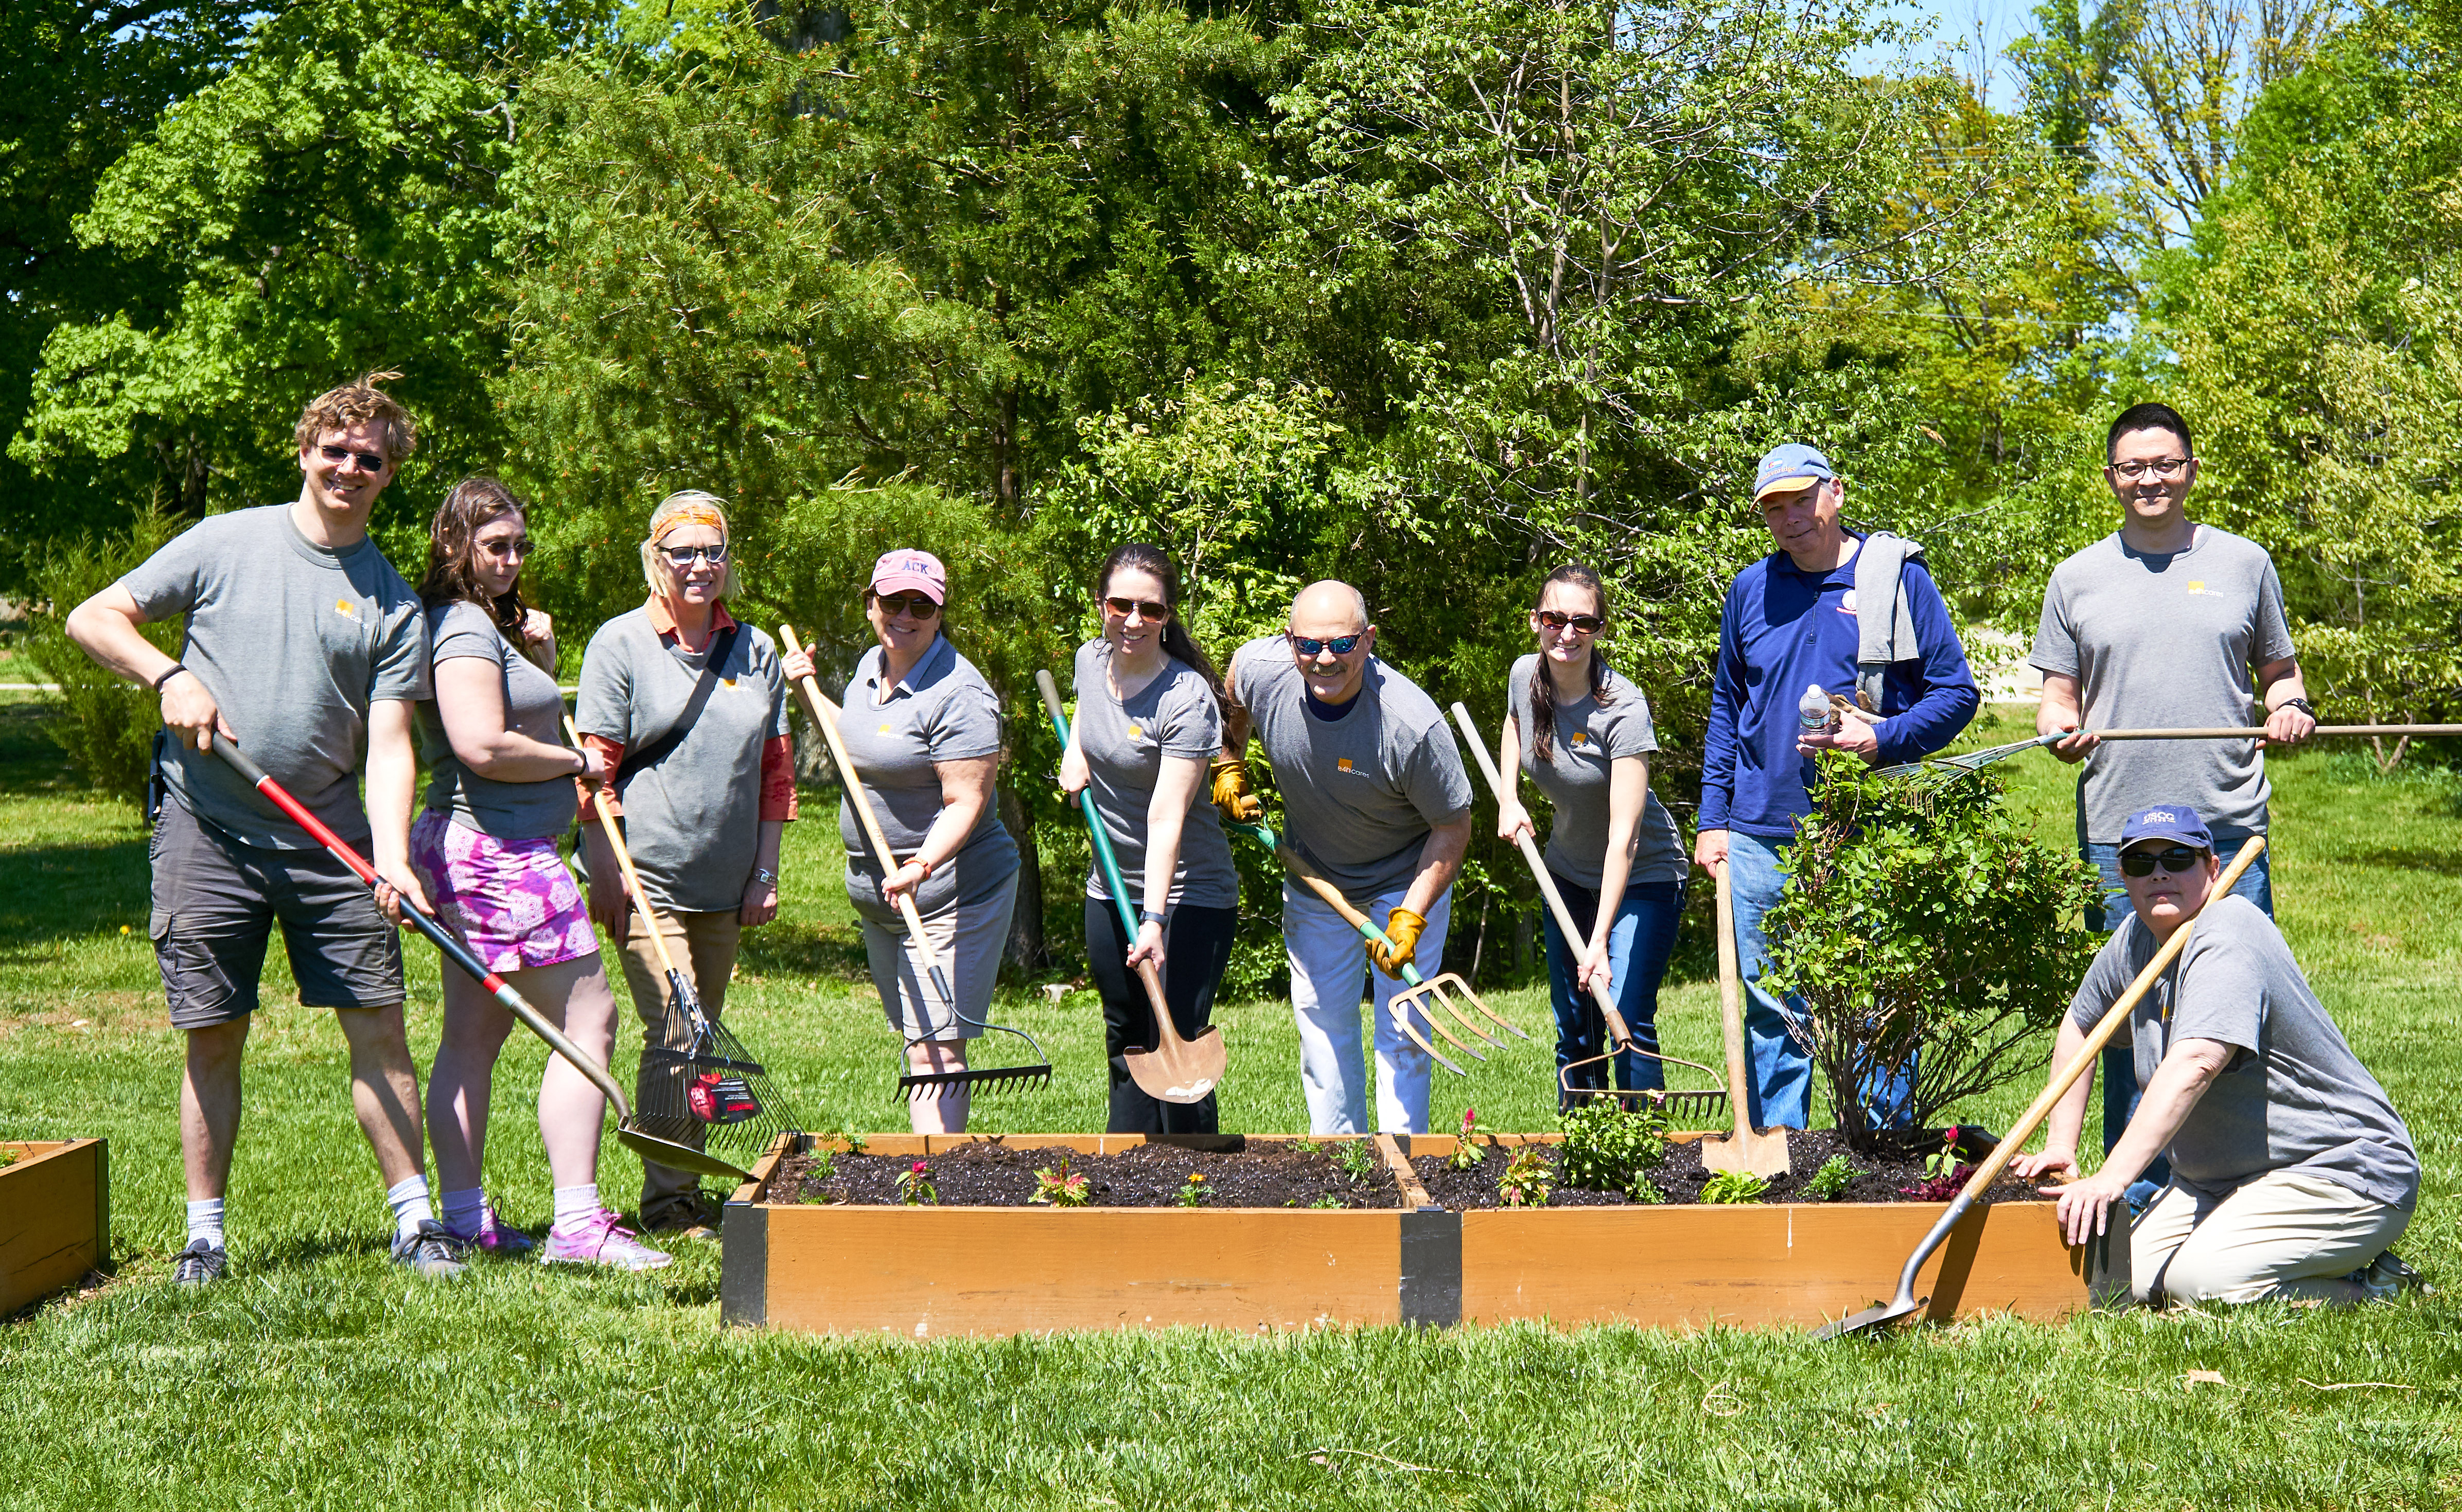 E4H team members with plant boxes gardening for veterans at Fort Belvoir Military Base